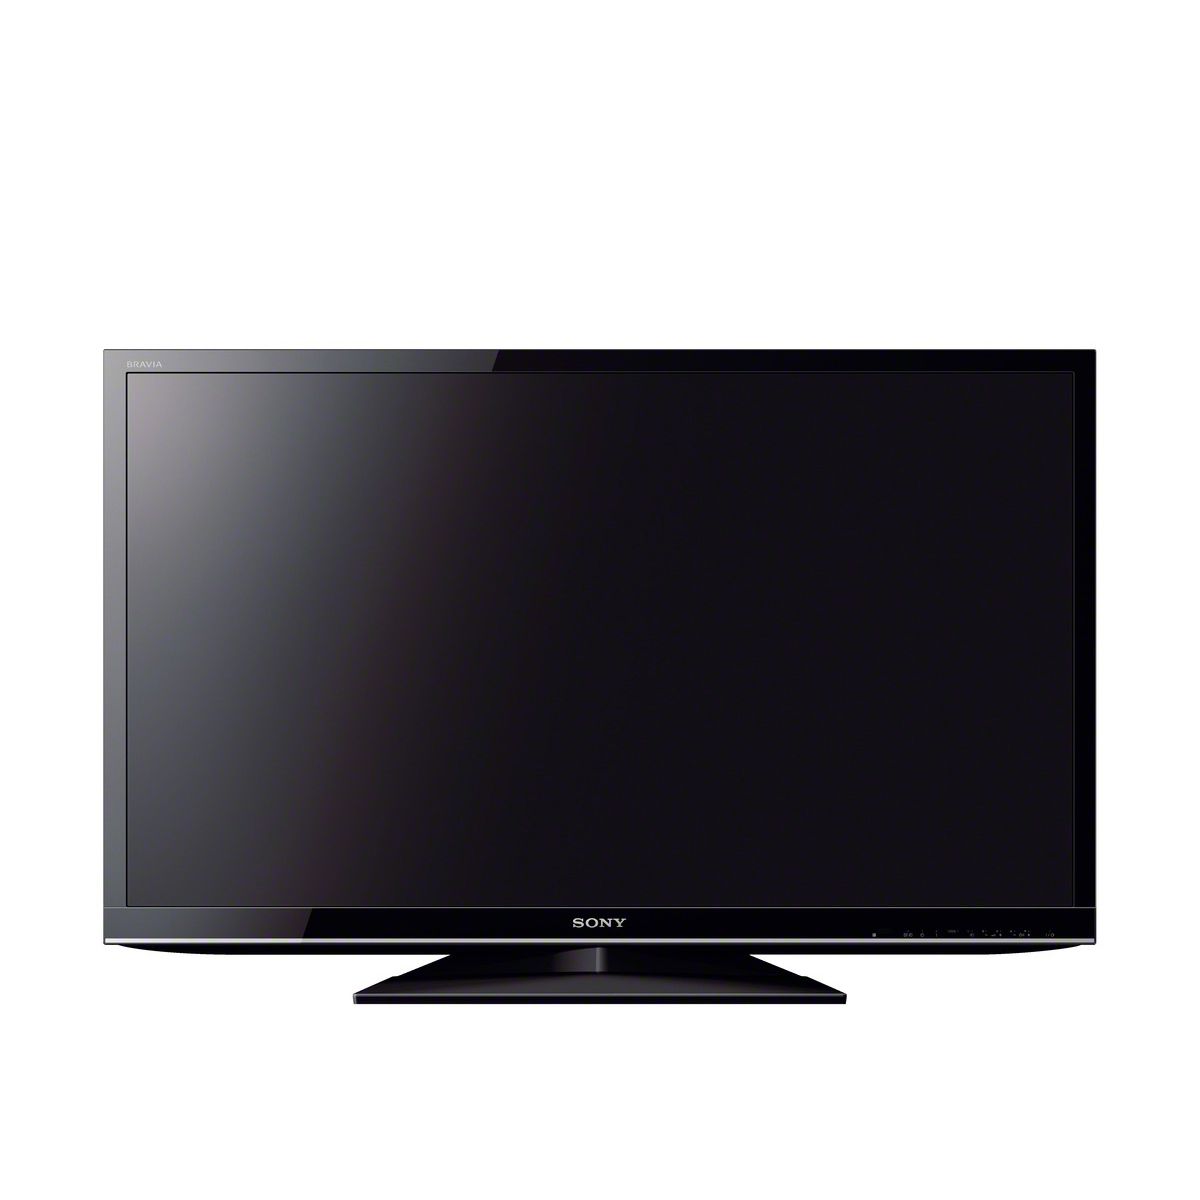 Televisions Reviews 2013: Sony KDL-42EX440 42" Class 1080p LCD HDTV